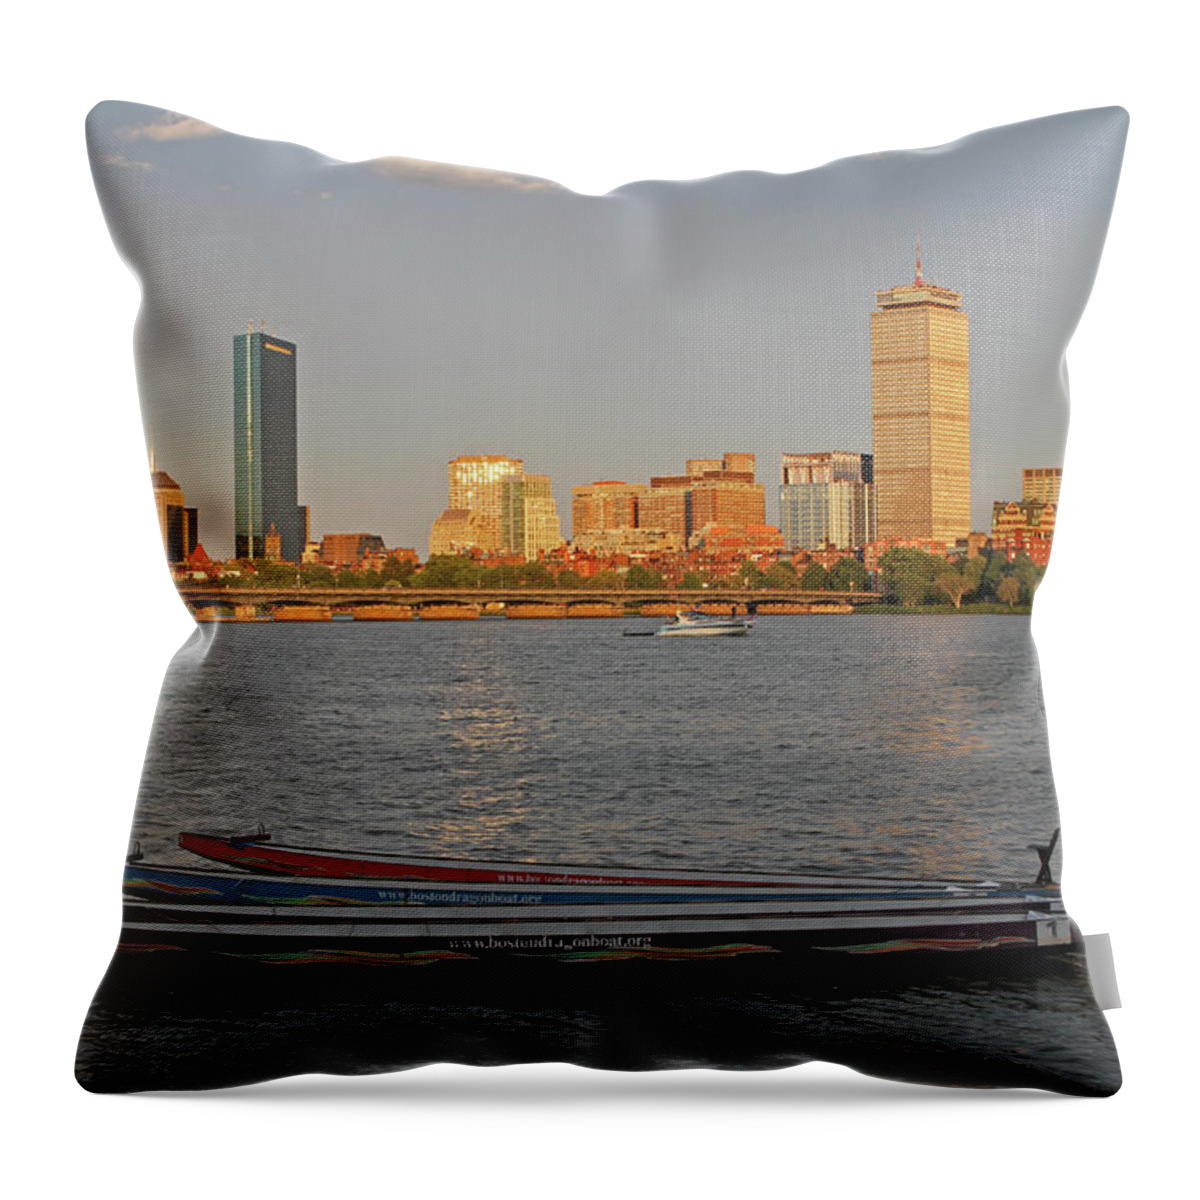 Boston Throw Pillow featuring the photograph Boston Dragon Boats by Juergen Roth